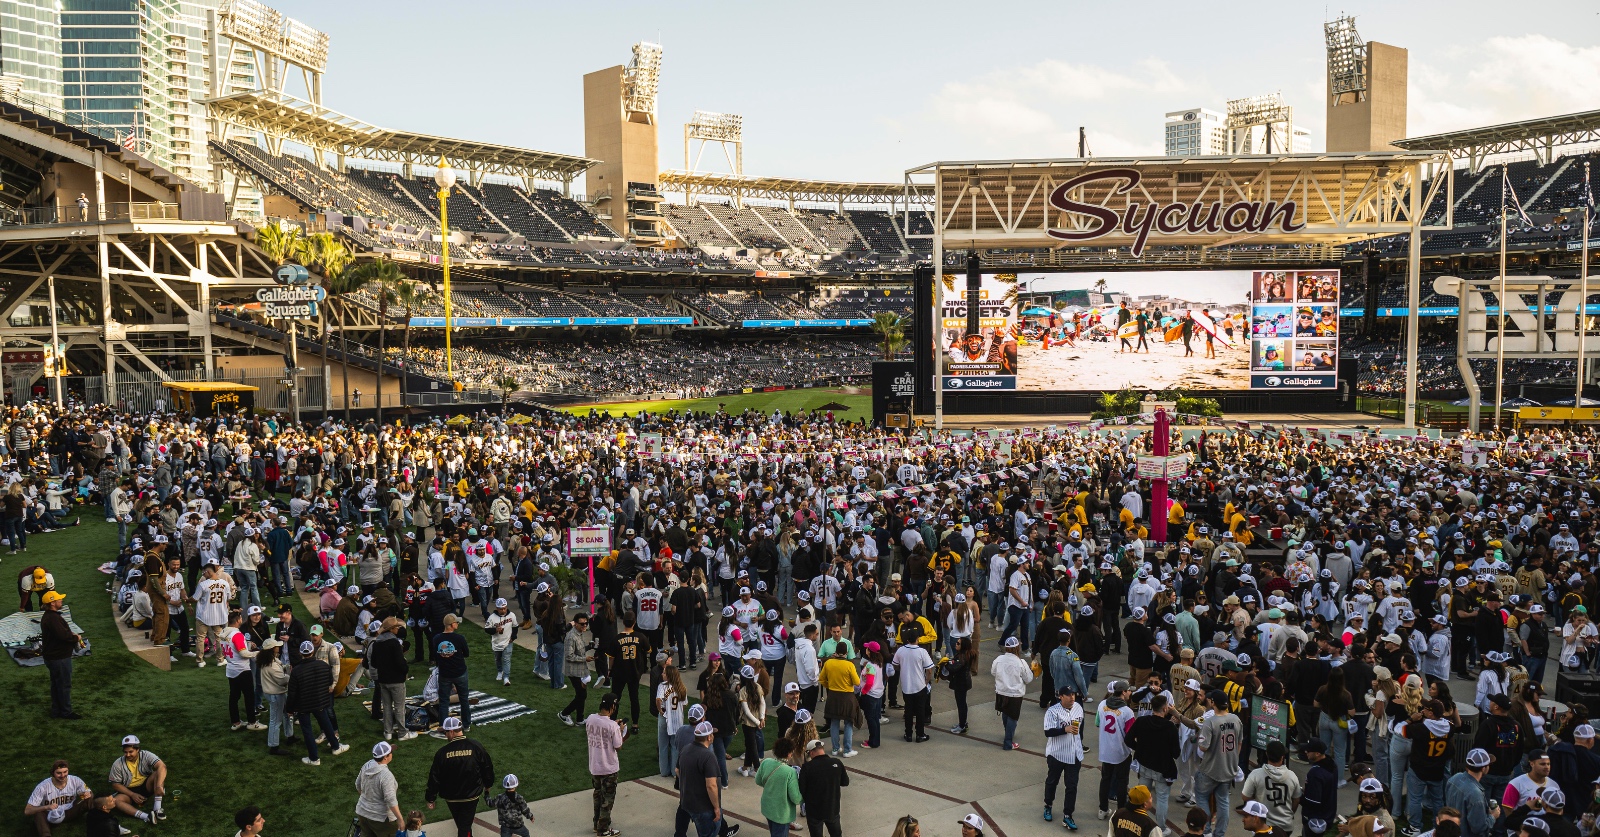 Crowd at the new Gallagher Square in Petco Park